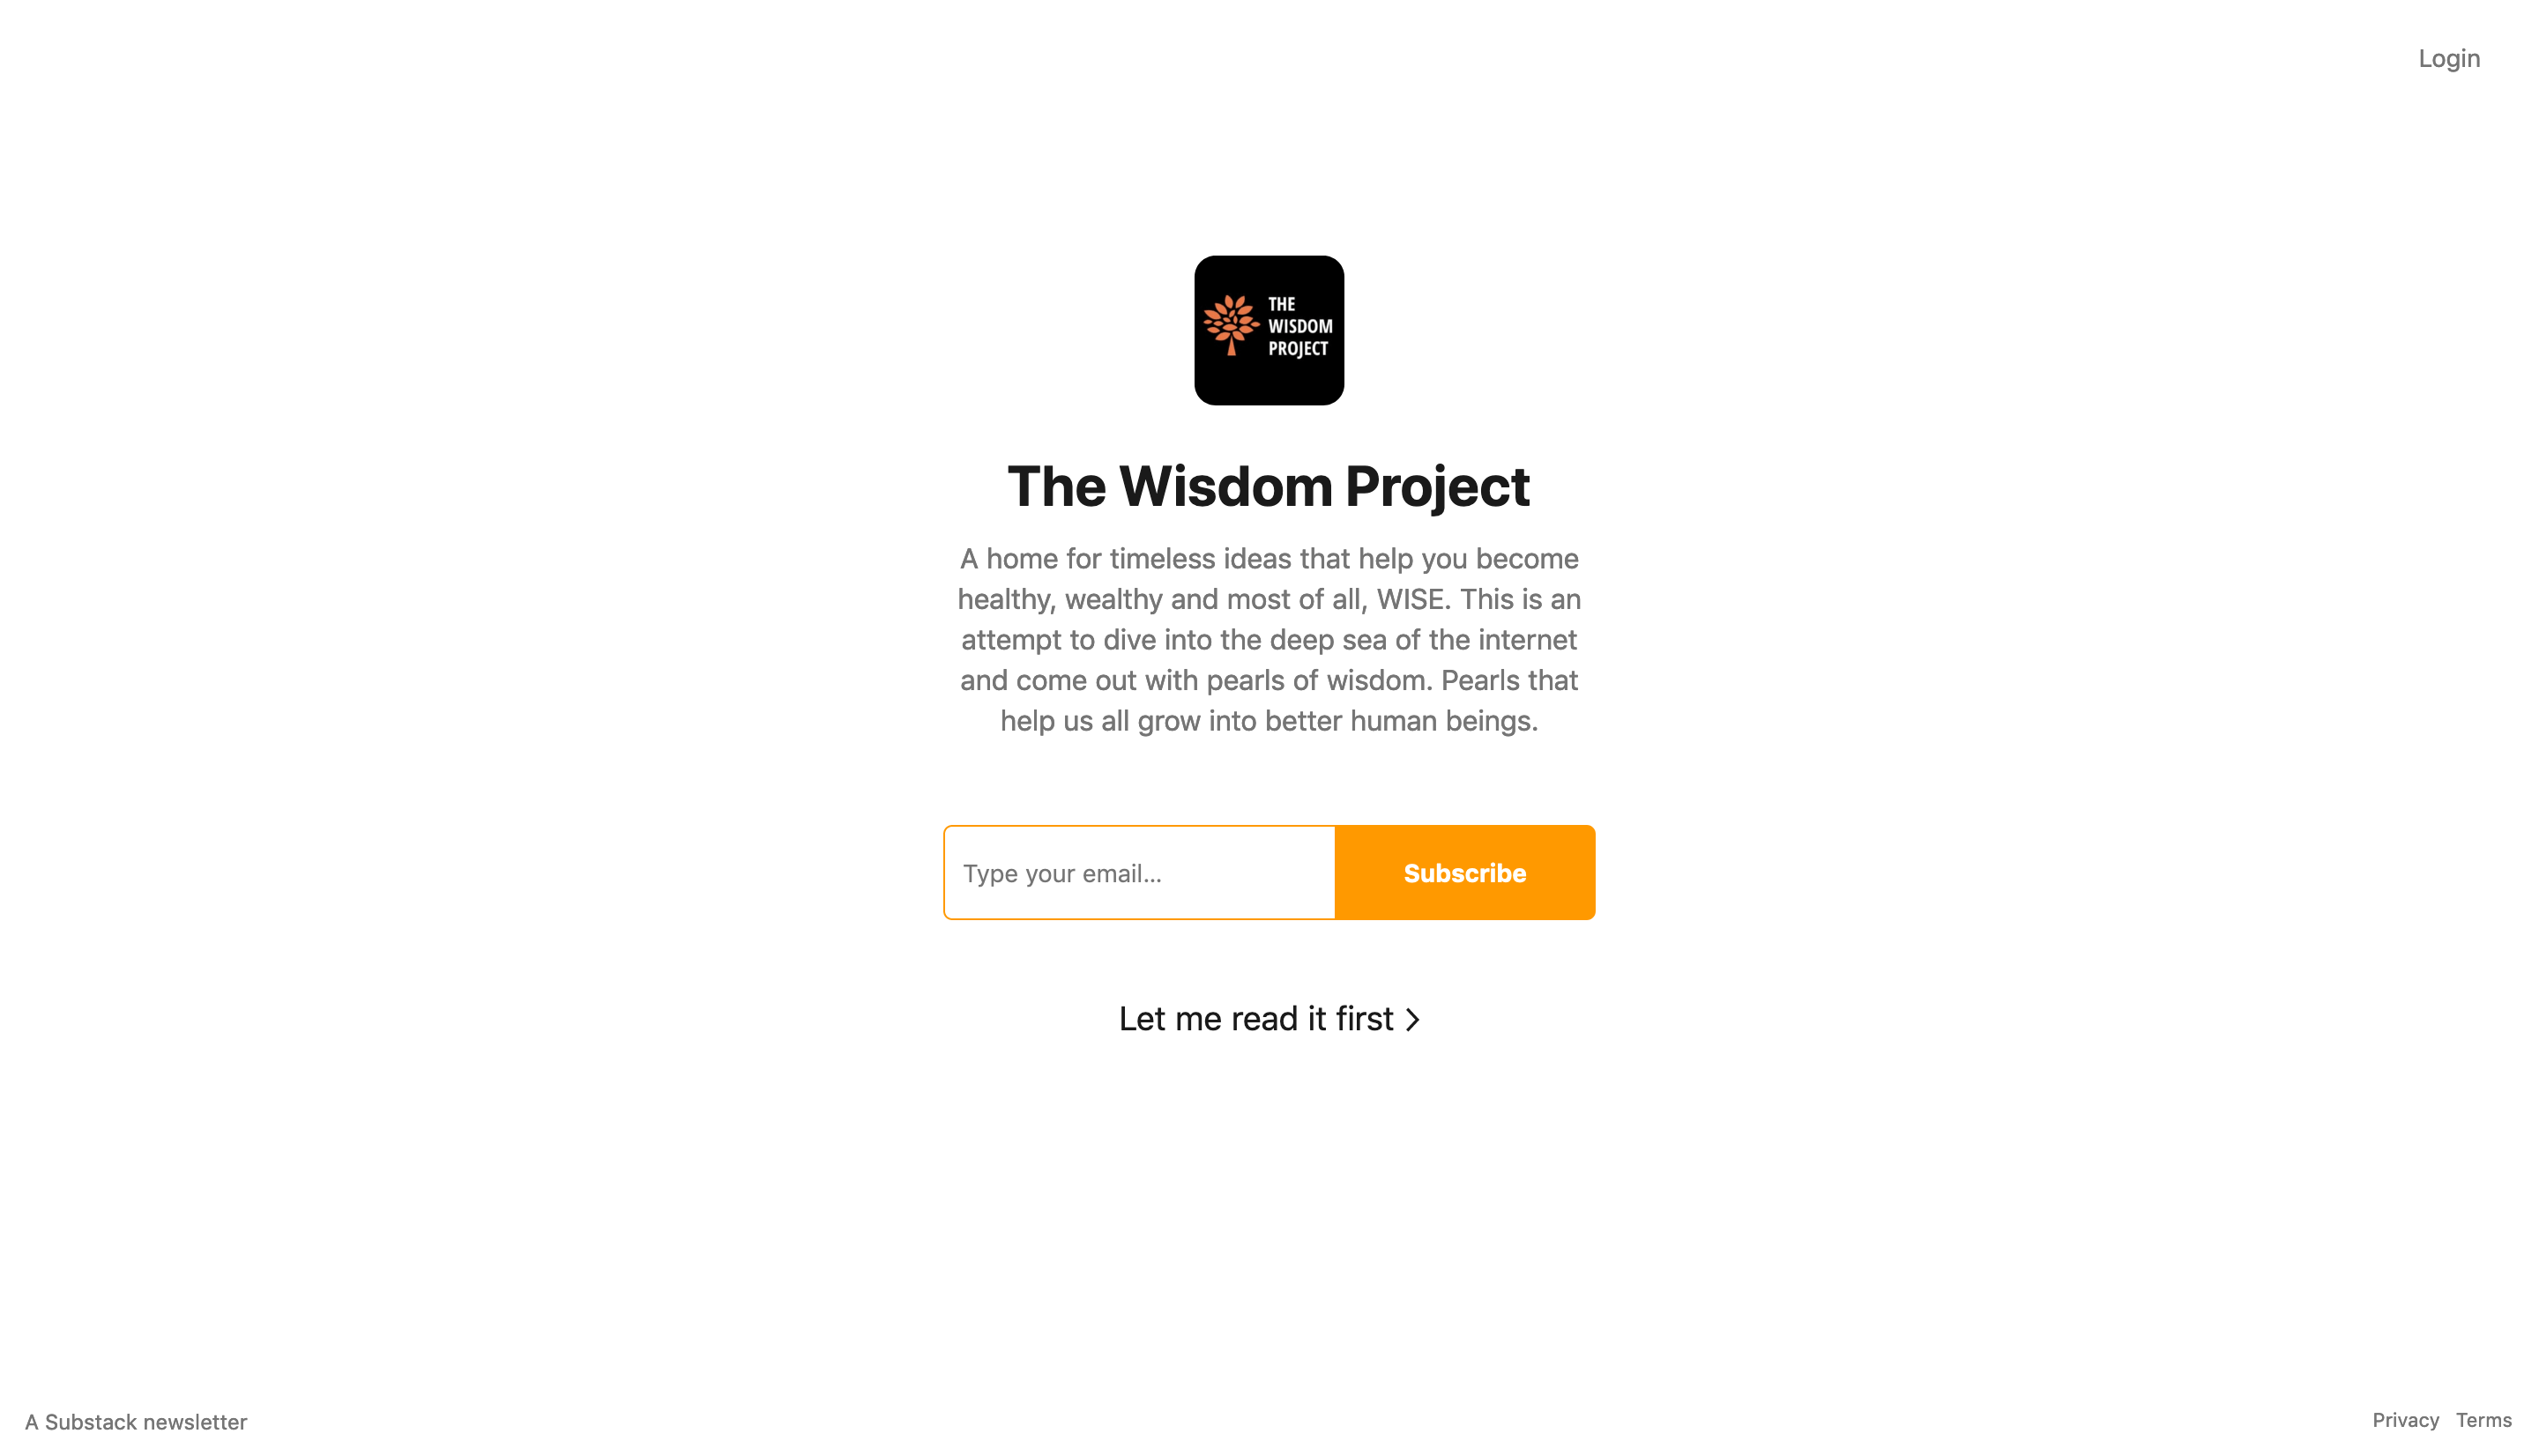 The Wisdom Project homepage